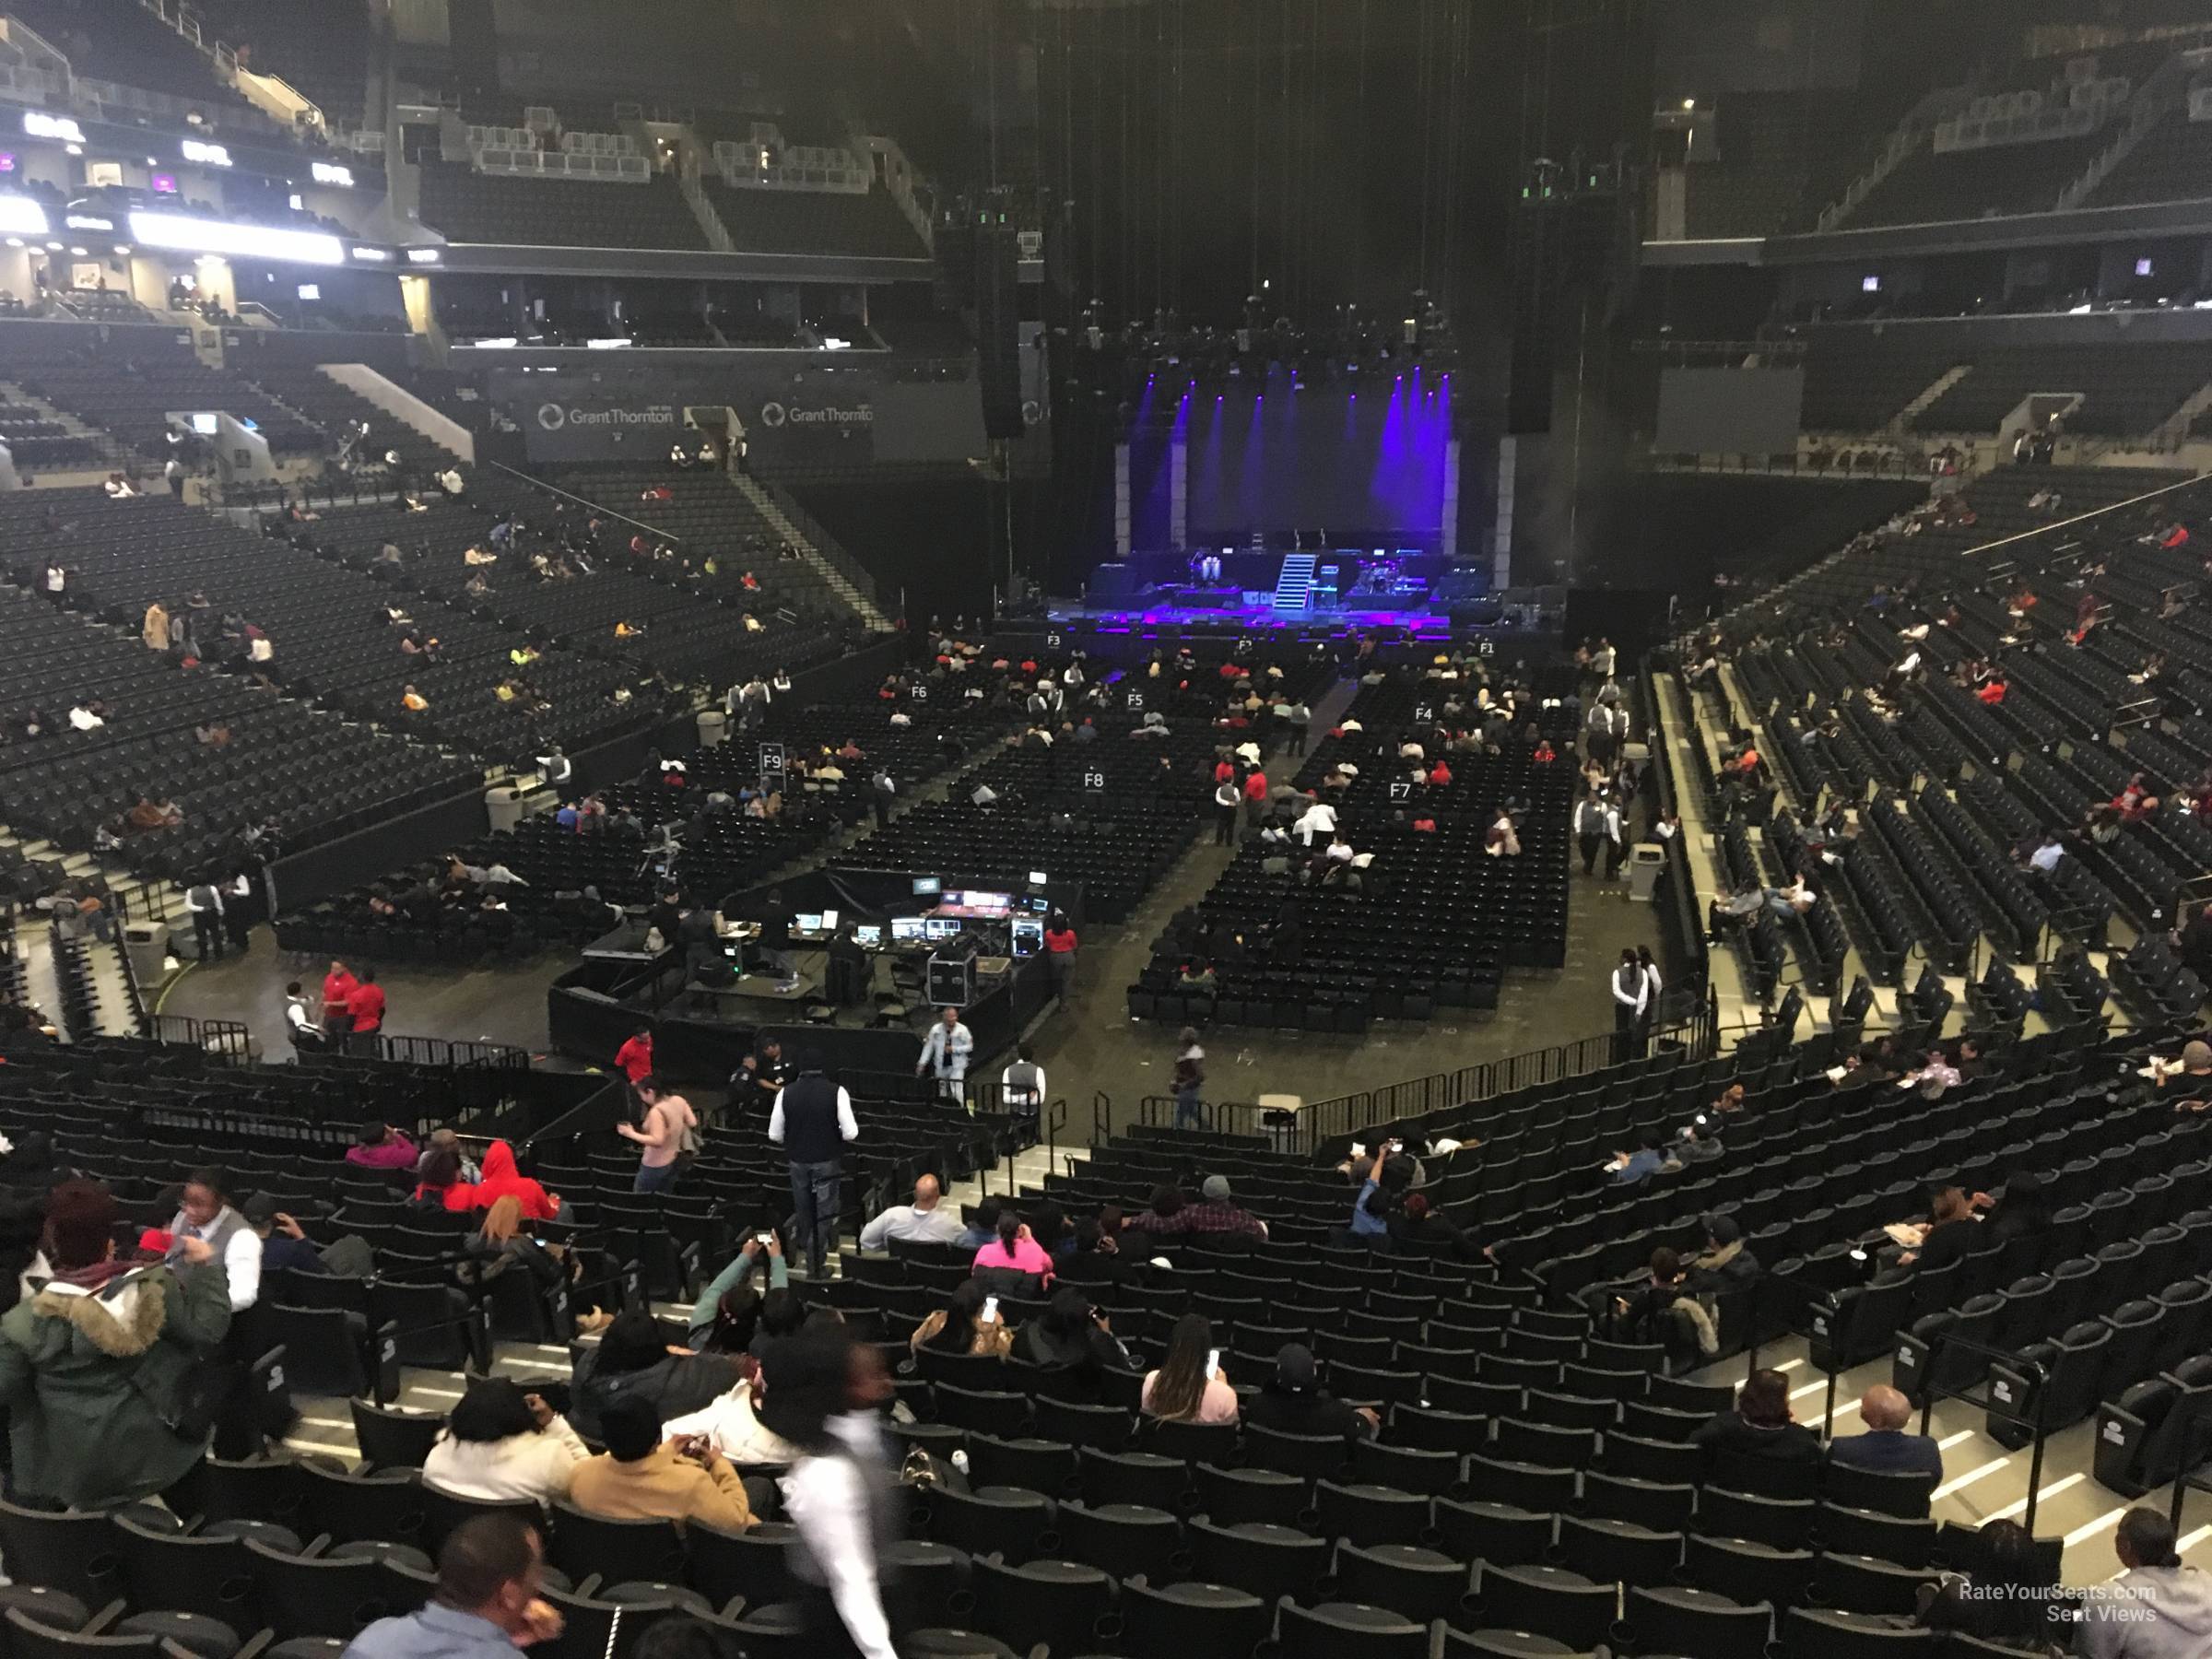 Section 115 at Barclays Center - RateYourSeats.com